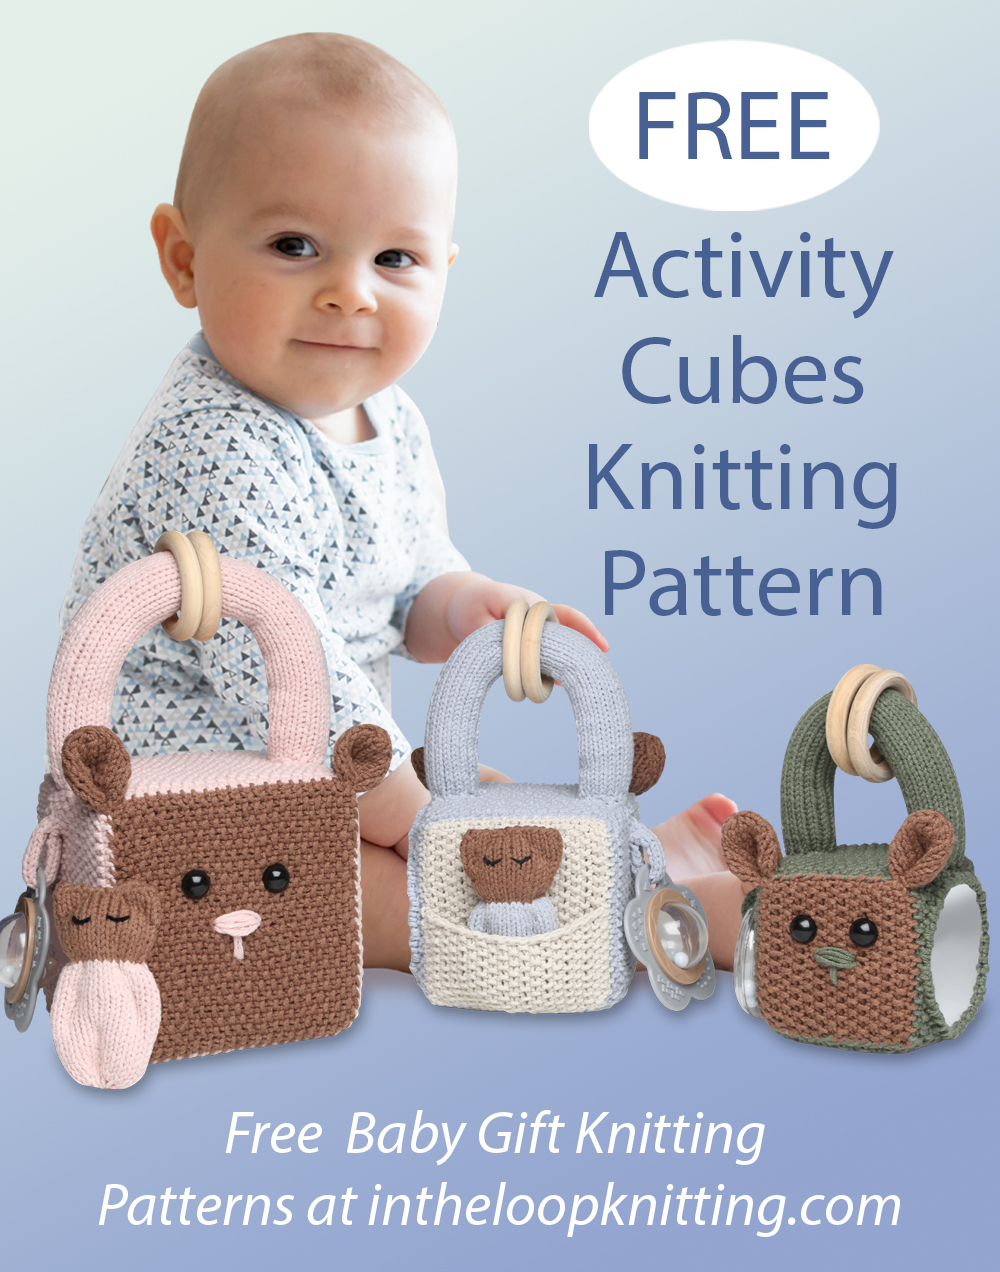 Free Baby Activity Cubes Knitting Pattern